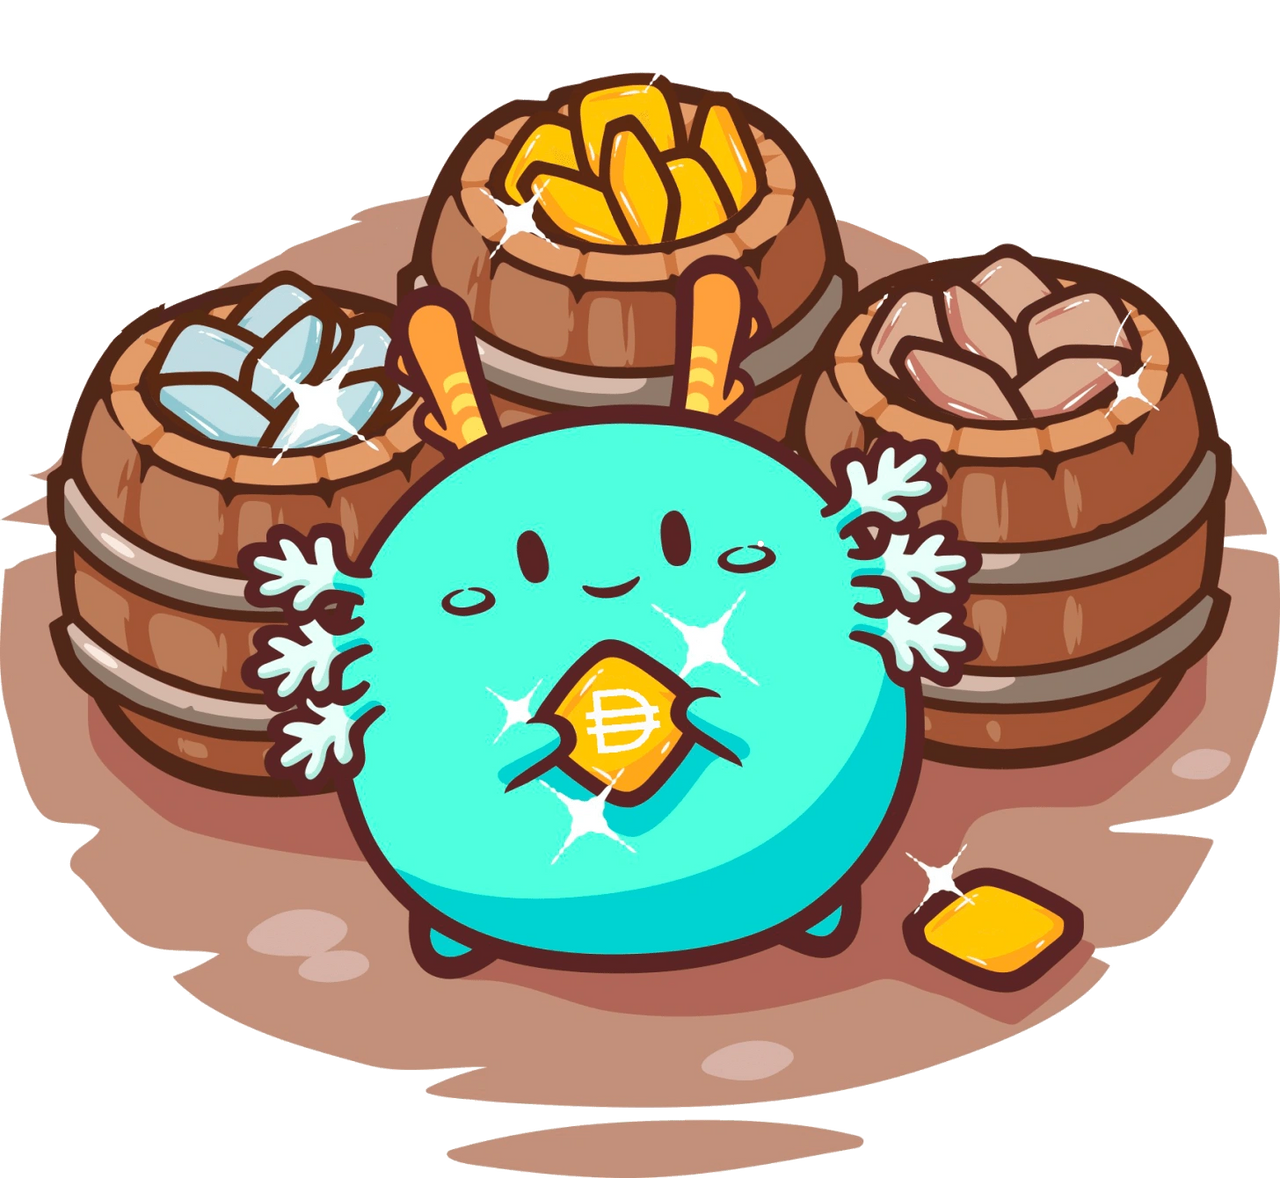 P2E or play-to-earn games like Axie Infinity are changing the landscape of gaming.